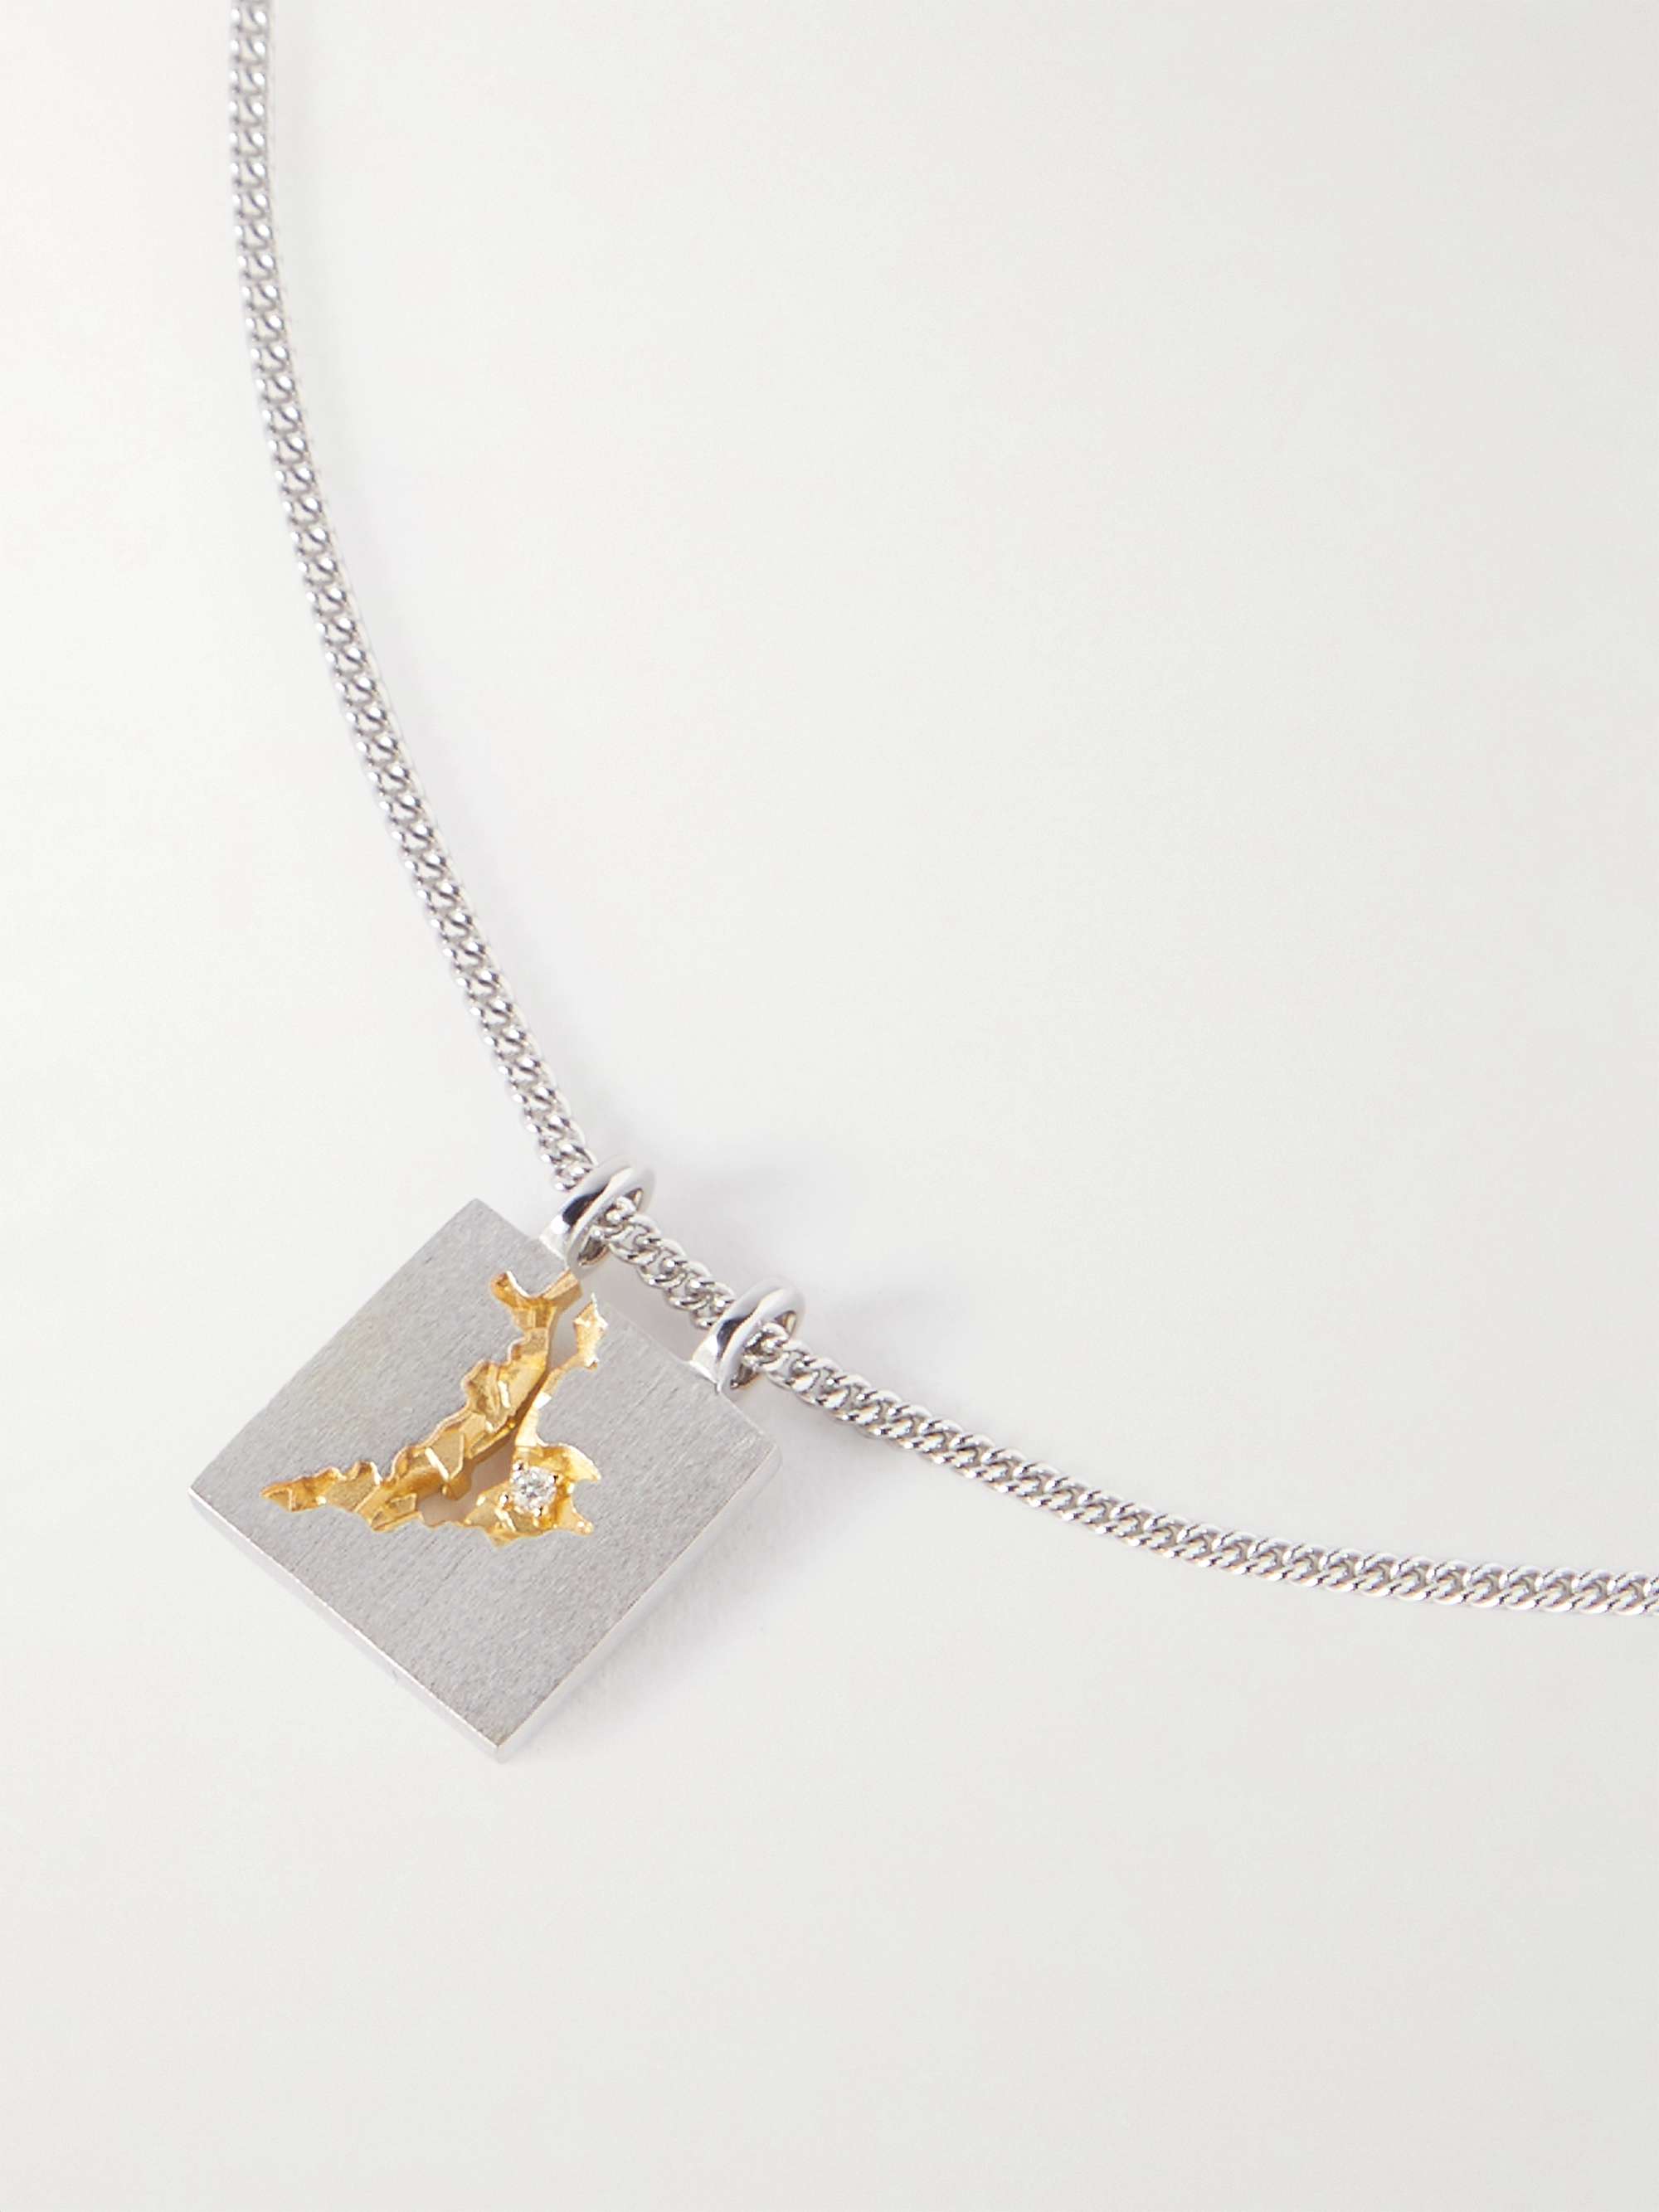 TOM WOOD Rhodium- and Gold-Plated Silver Diamond Pendant Necklace